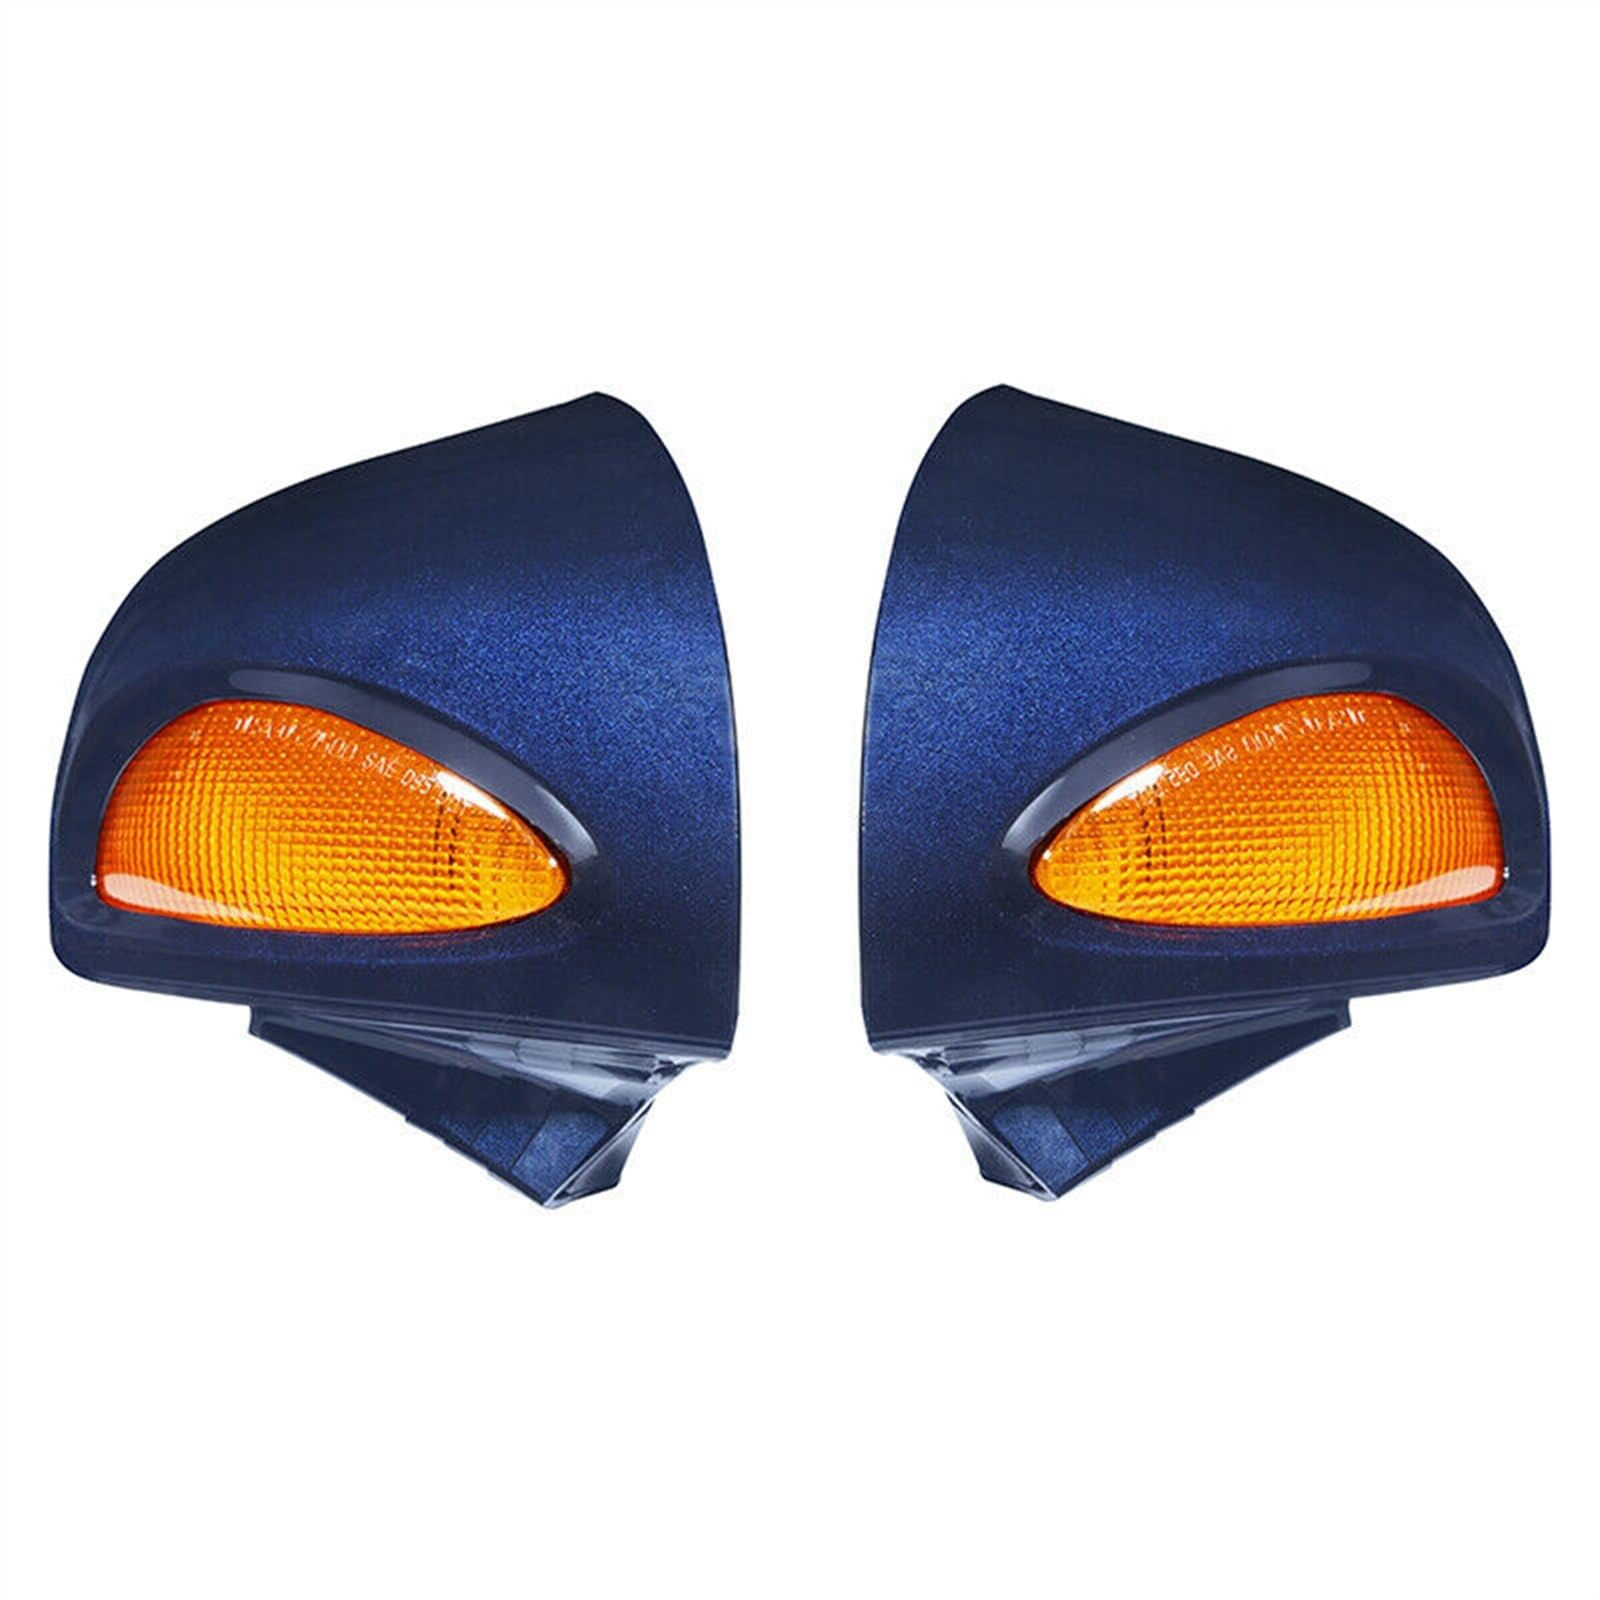 Motorcycle Rear View Mirrors Turn Signals For R1100RT R1150RT R1100 RT R1150 RT von WingOt